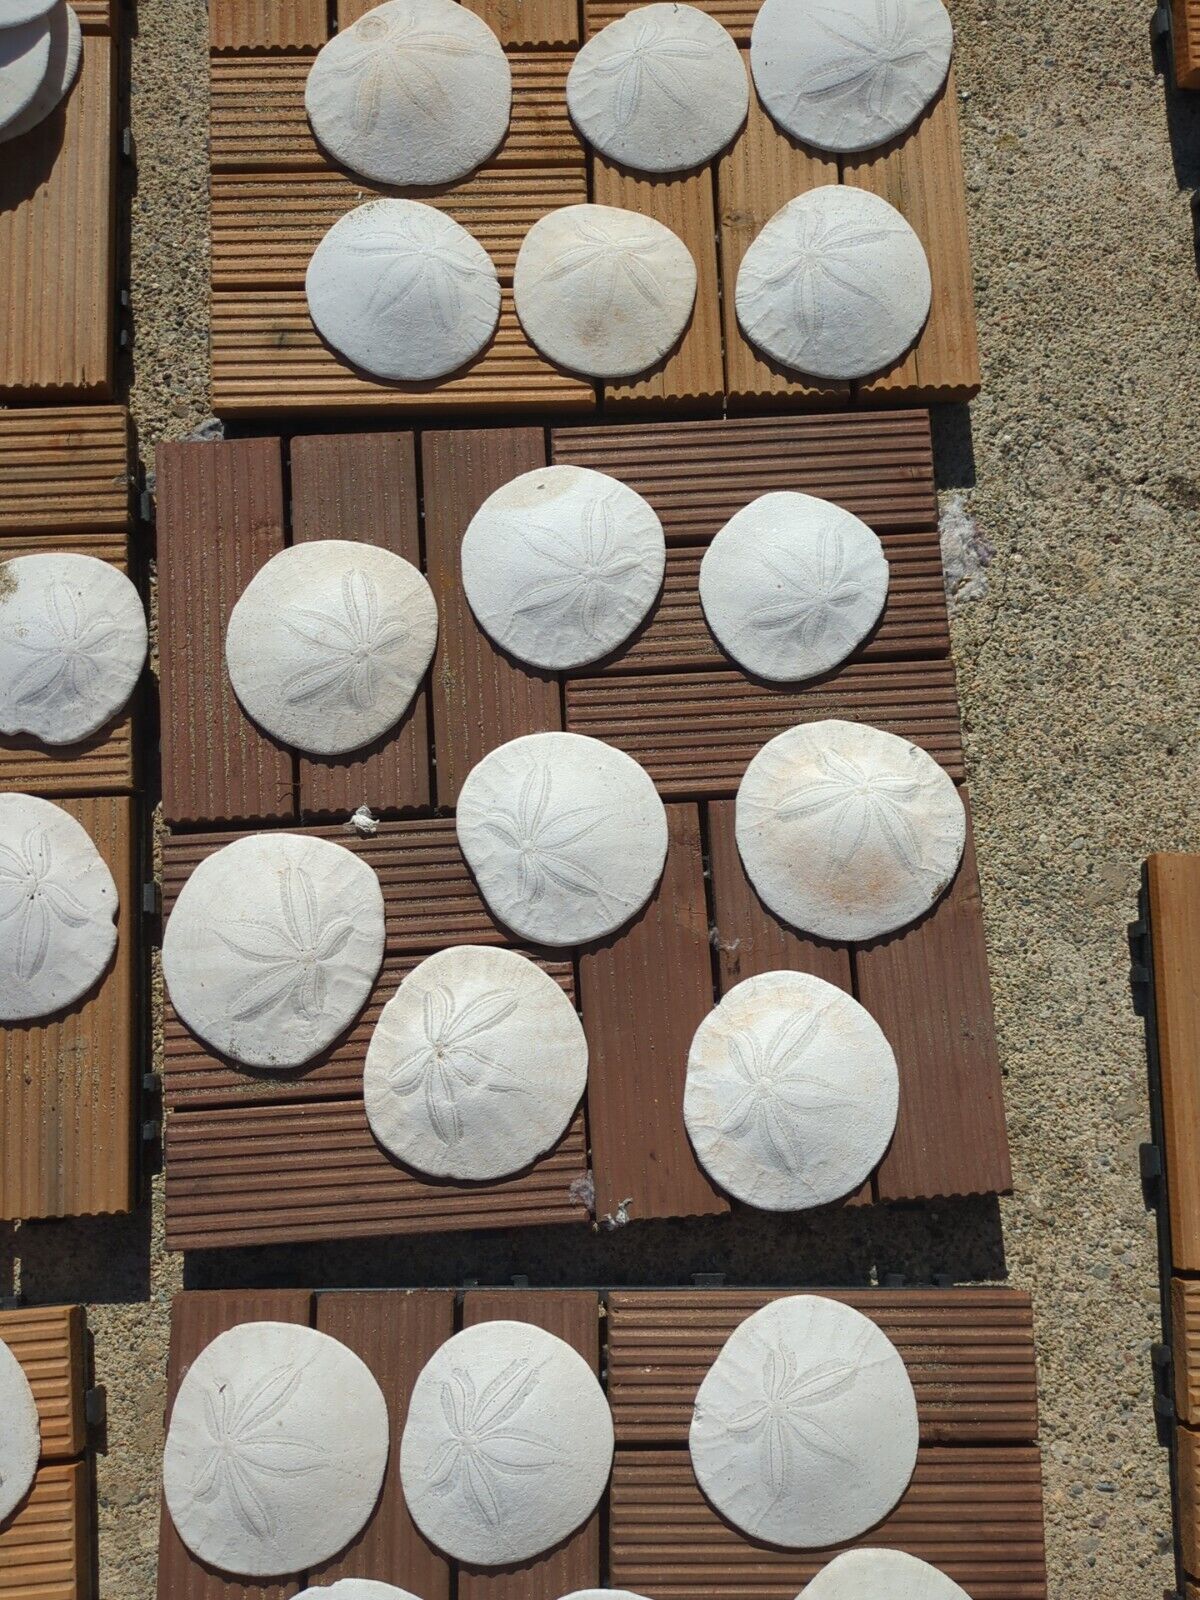  SAND DOLLARS From San Francisco Ocean Beach (3-4inches Wide) (Set Of 6)